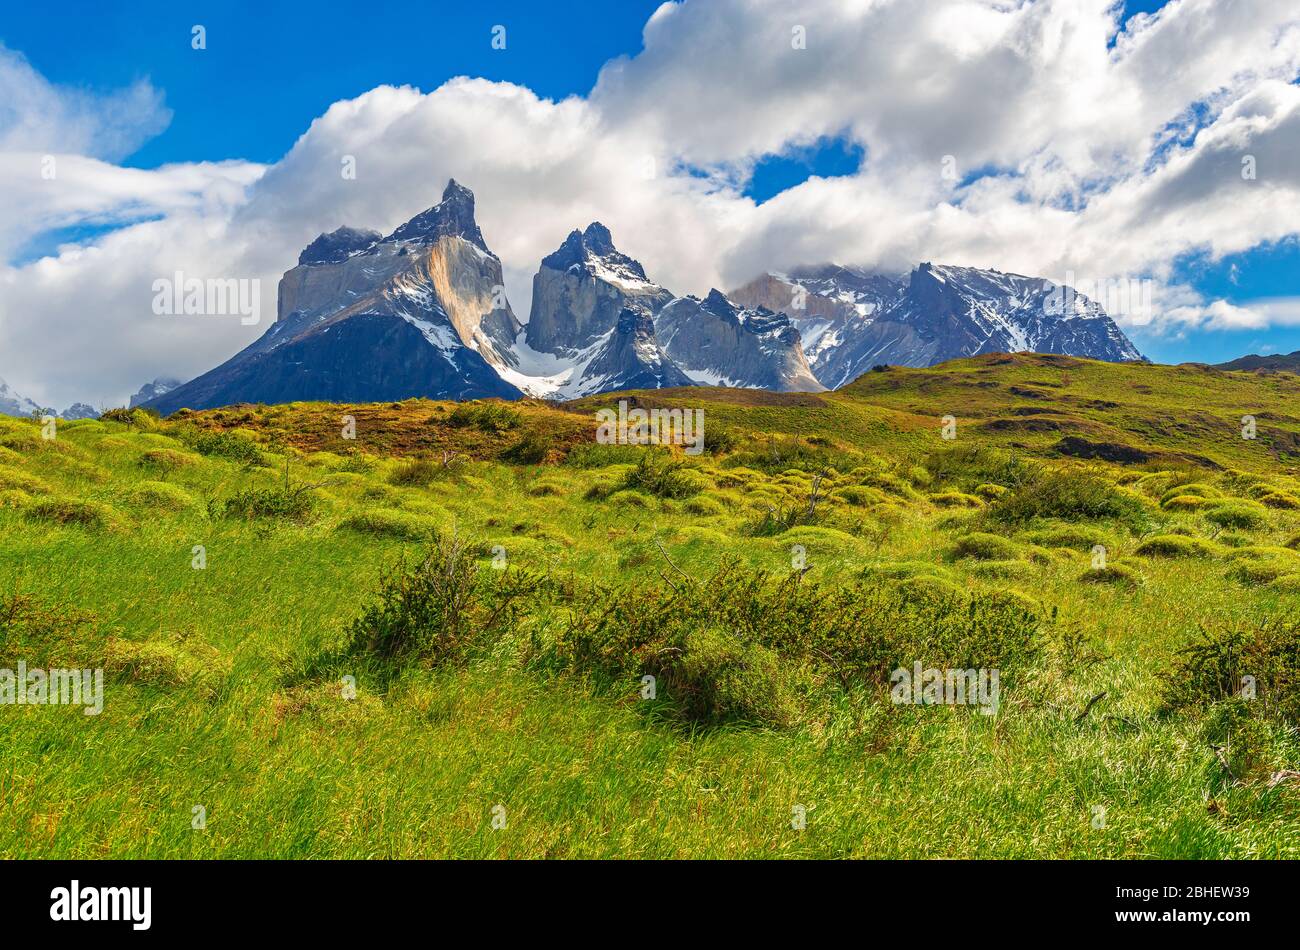 The Cuernos del Paine mountain peaks in spring, Torres del Paine national park, Patagonia, Chile. Stock Photo